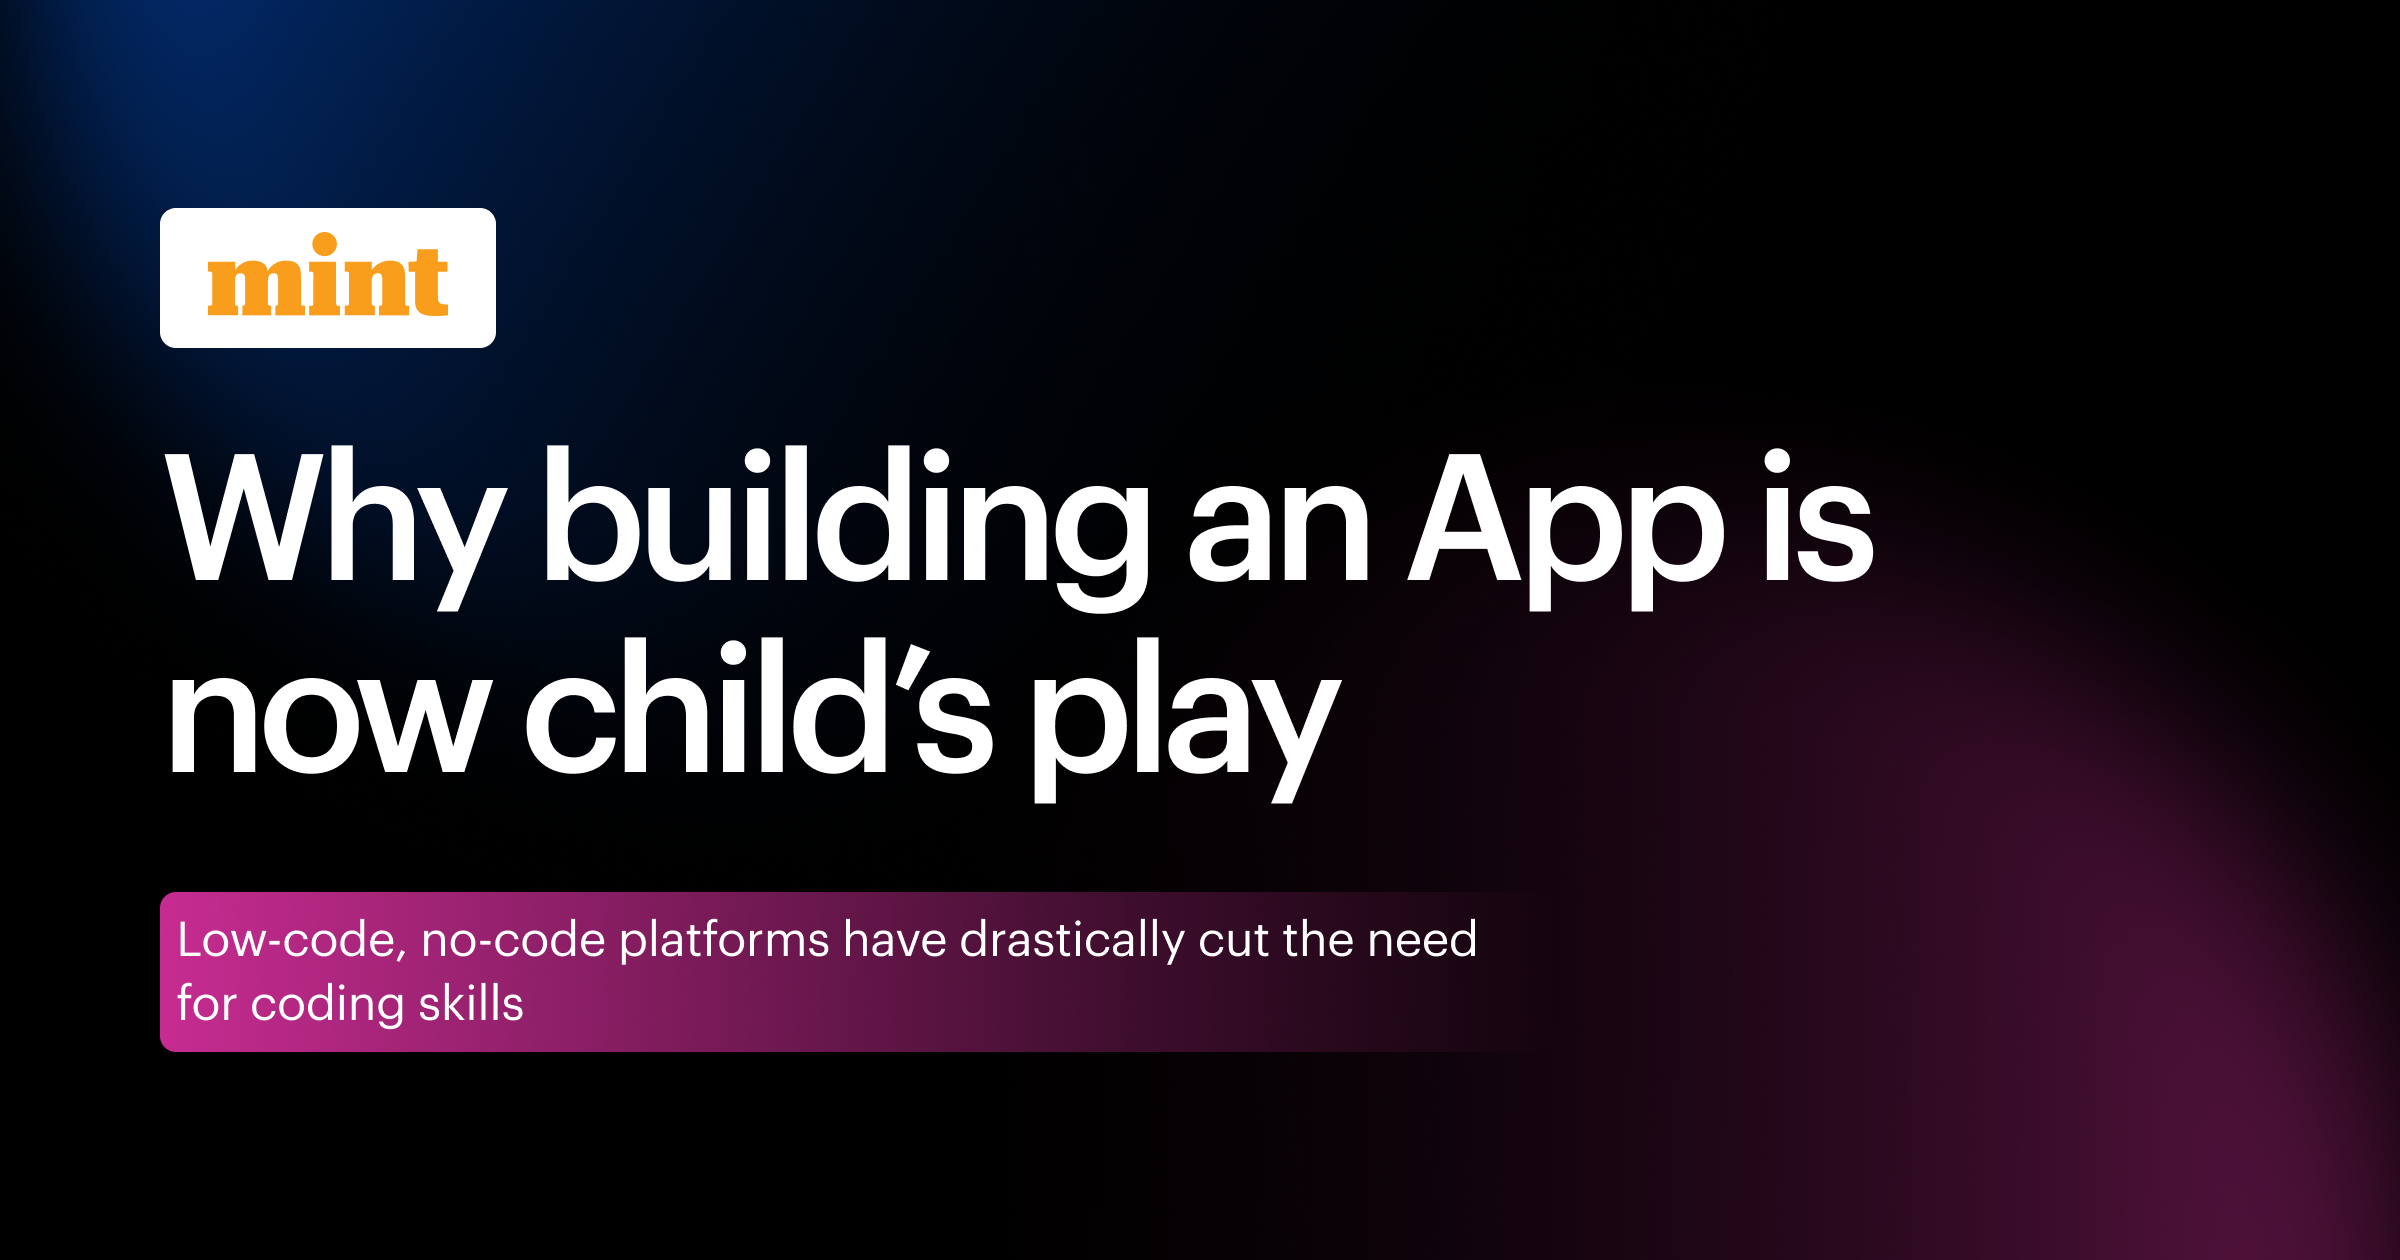 Why building an app is now child's play